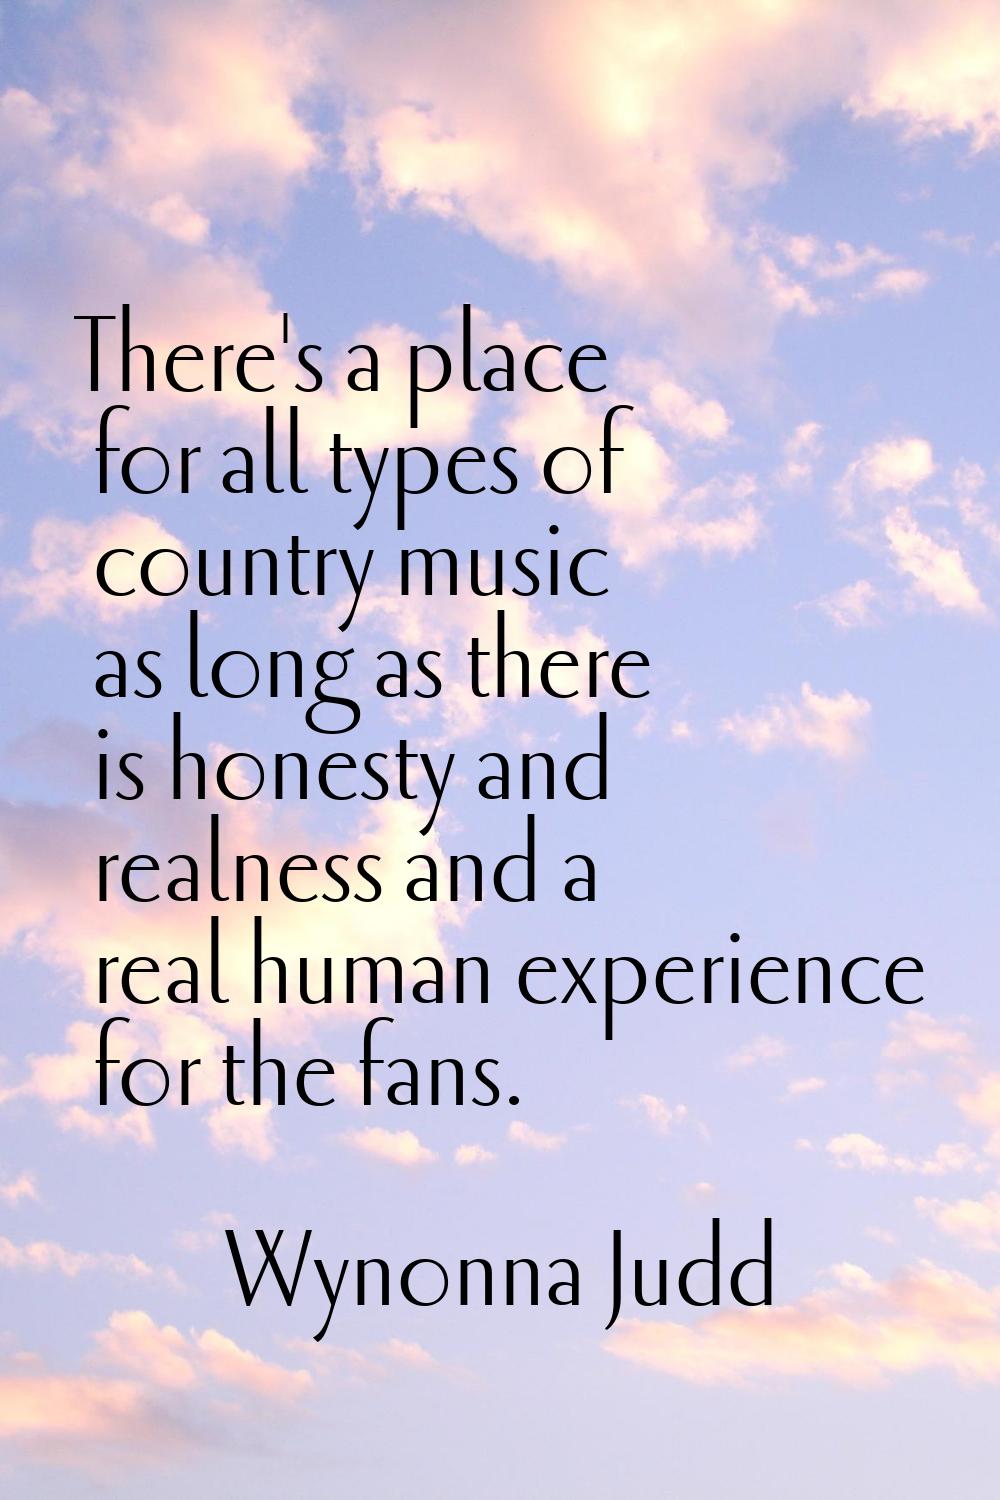 There's a place for all types of country music as long as there is honesty and realness and a real 